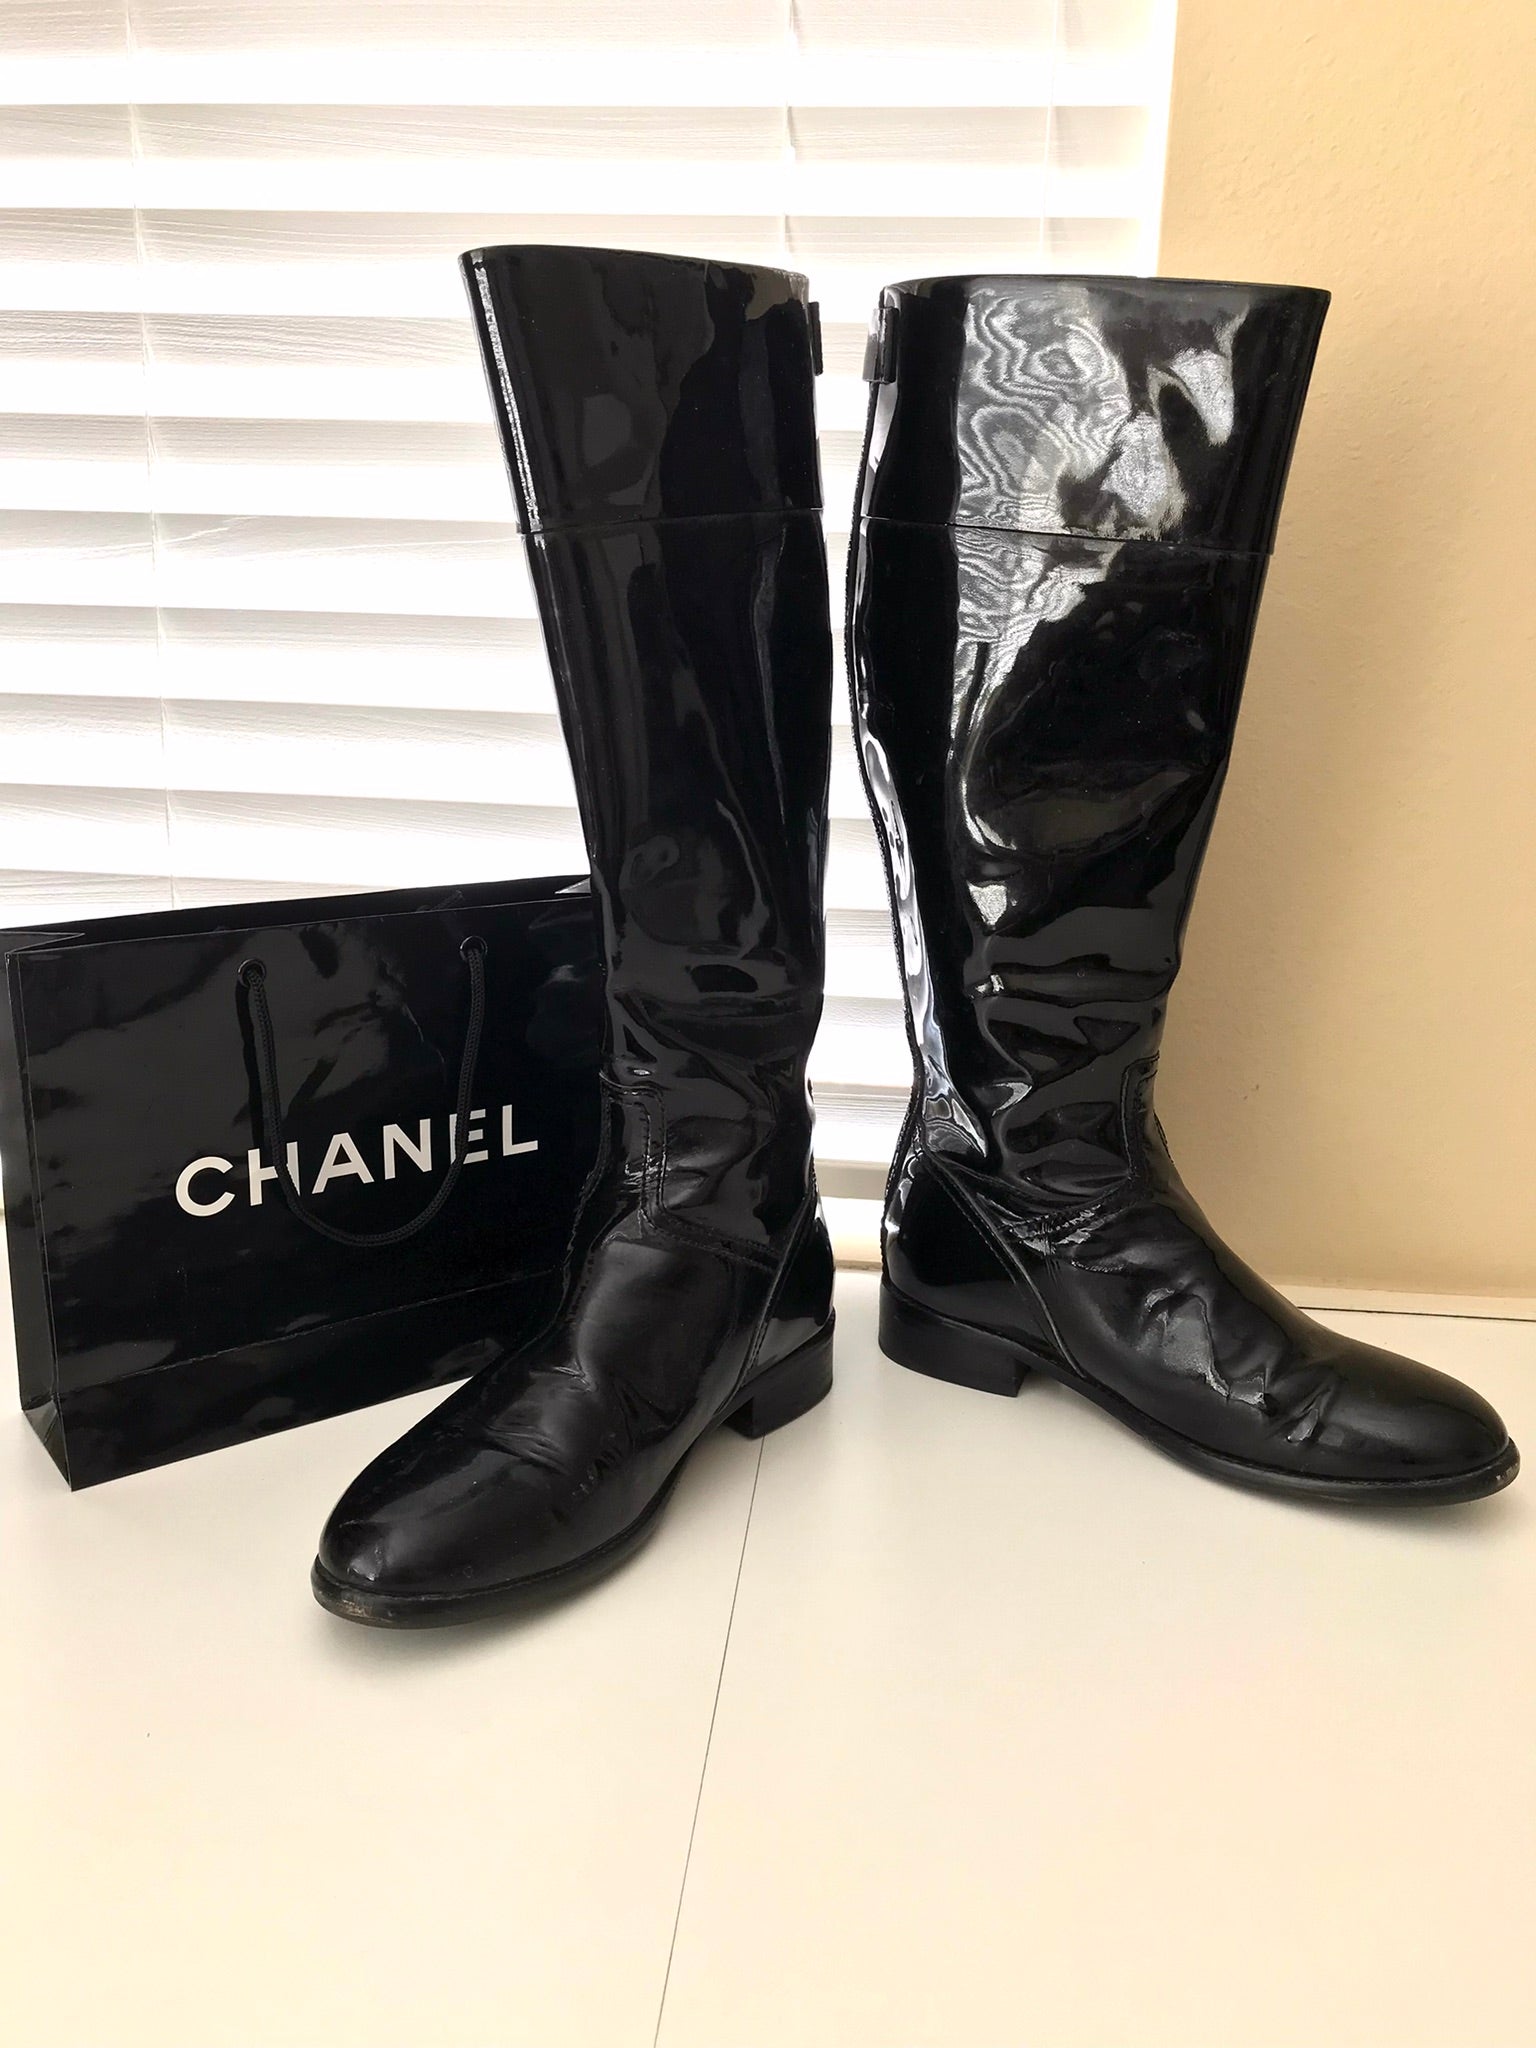 Vintage 90s/00s Chanel Tall Riding Boots Patent Leather 41 By Chanel